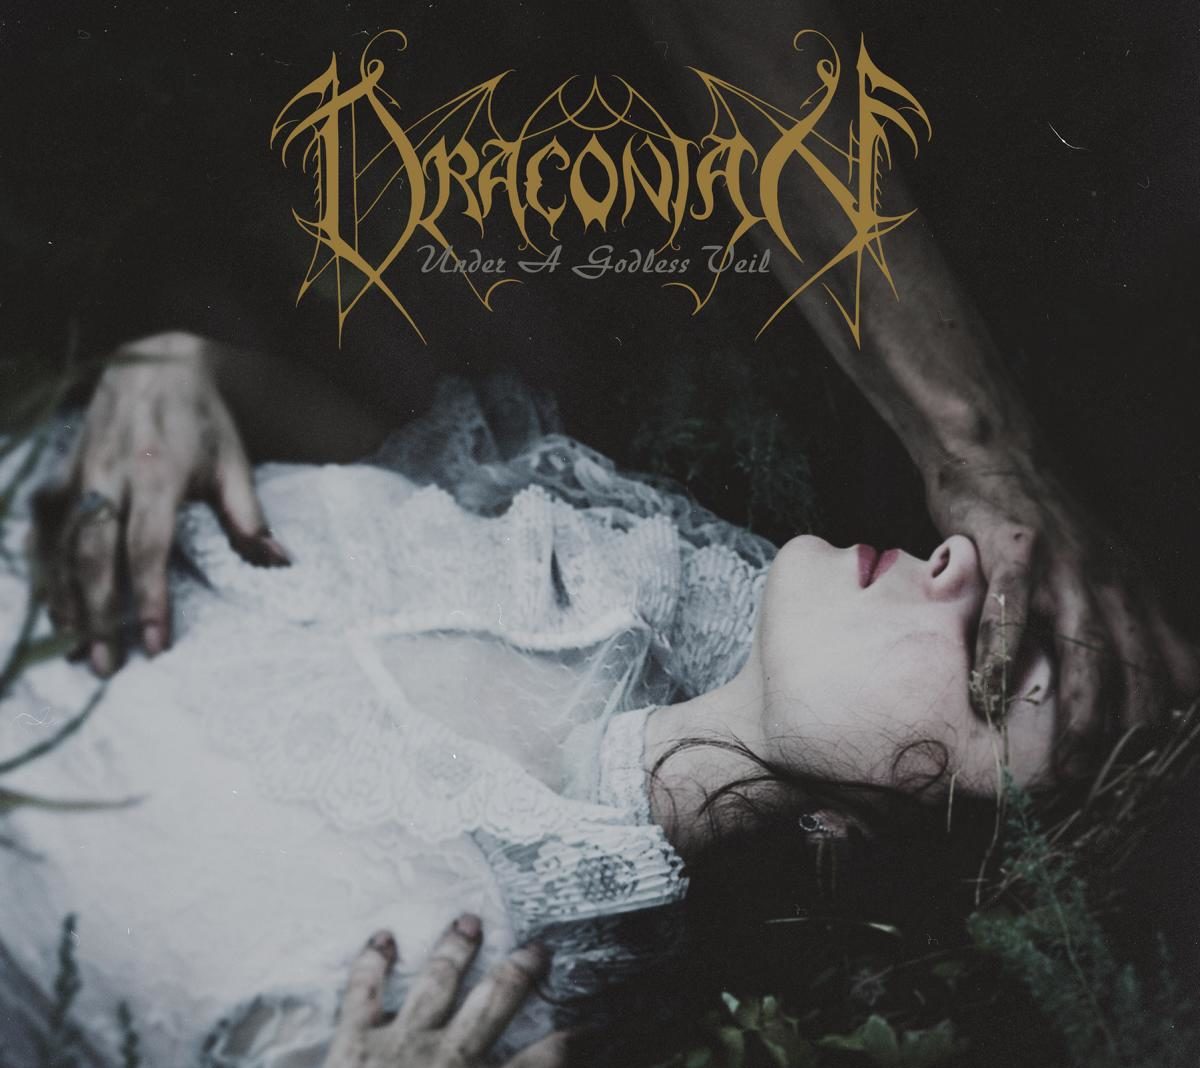 Draconian Cover (c) Napalm Records